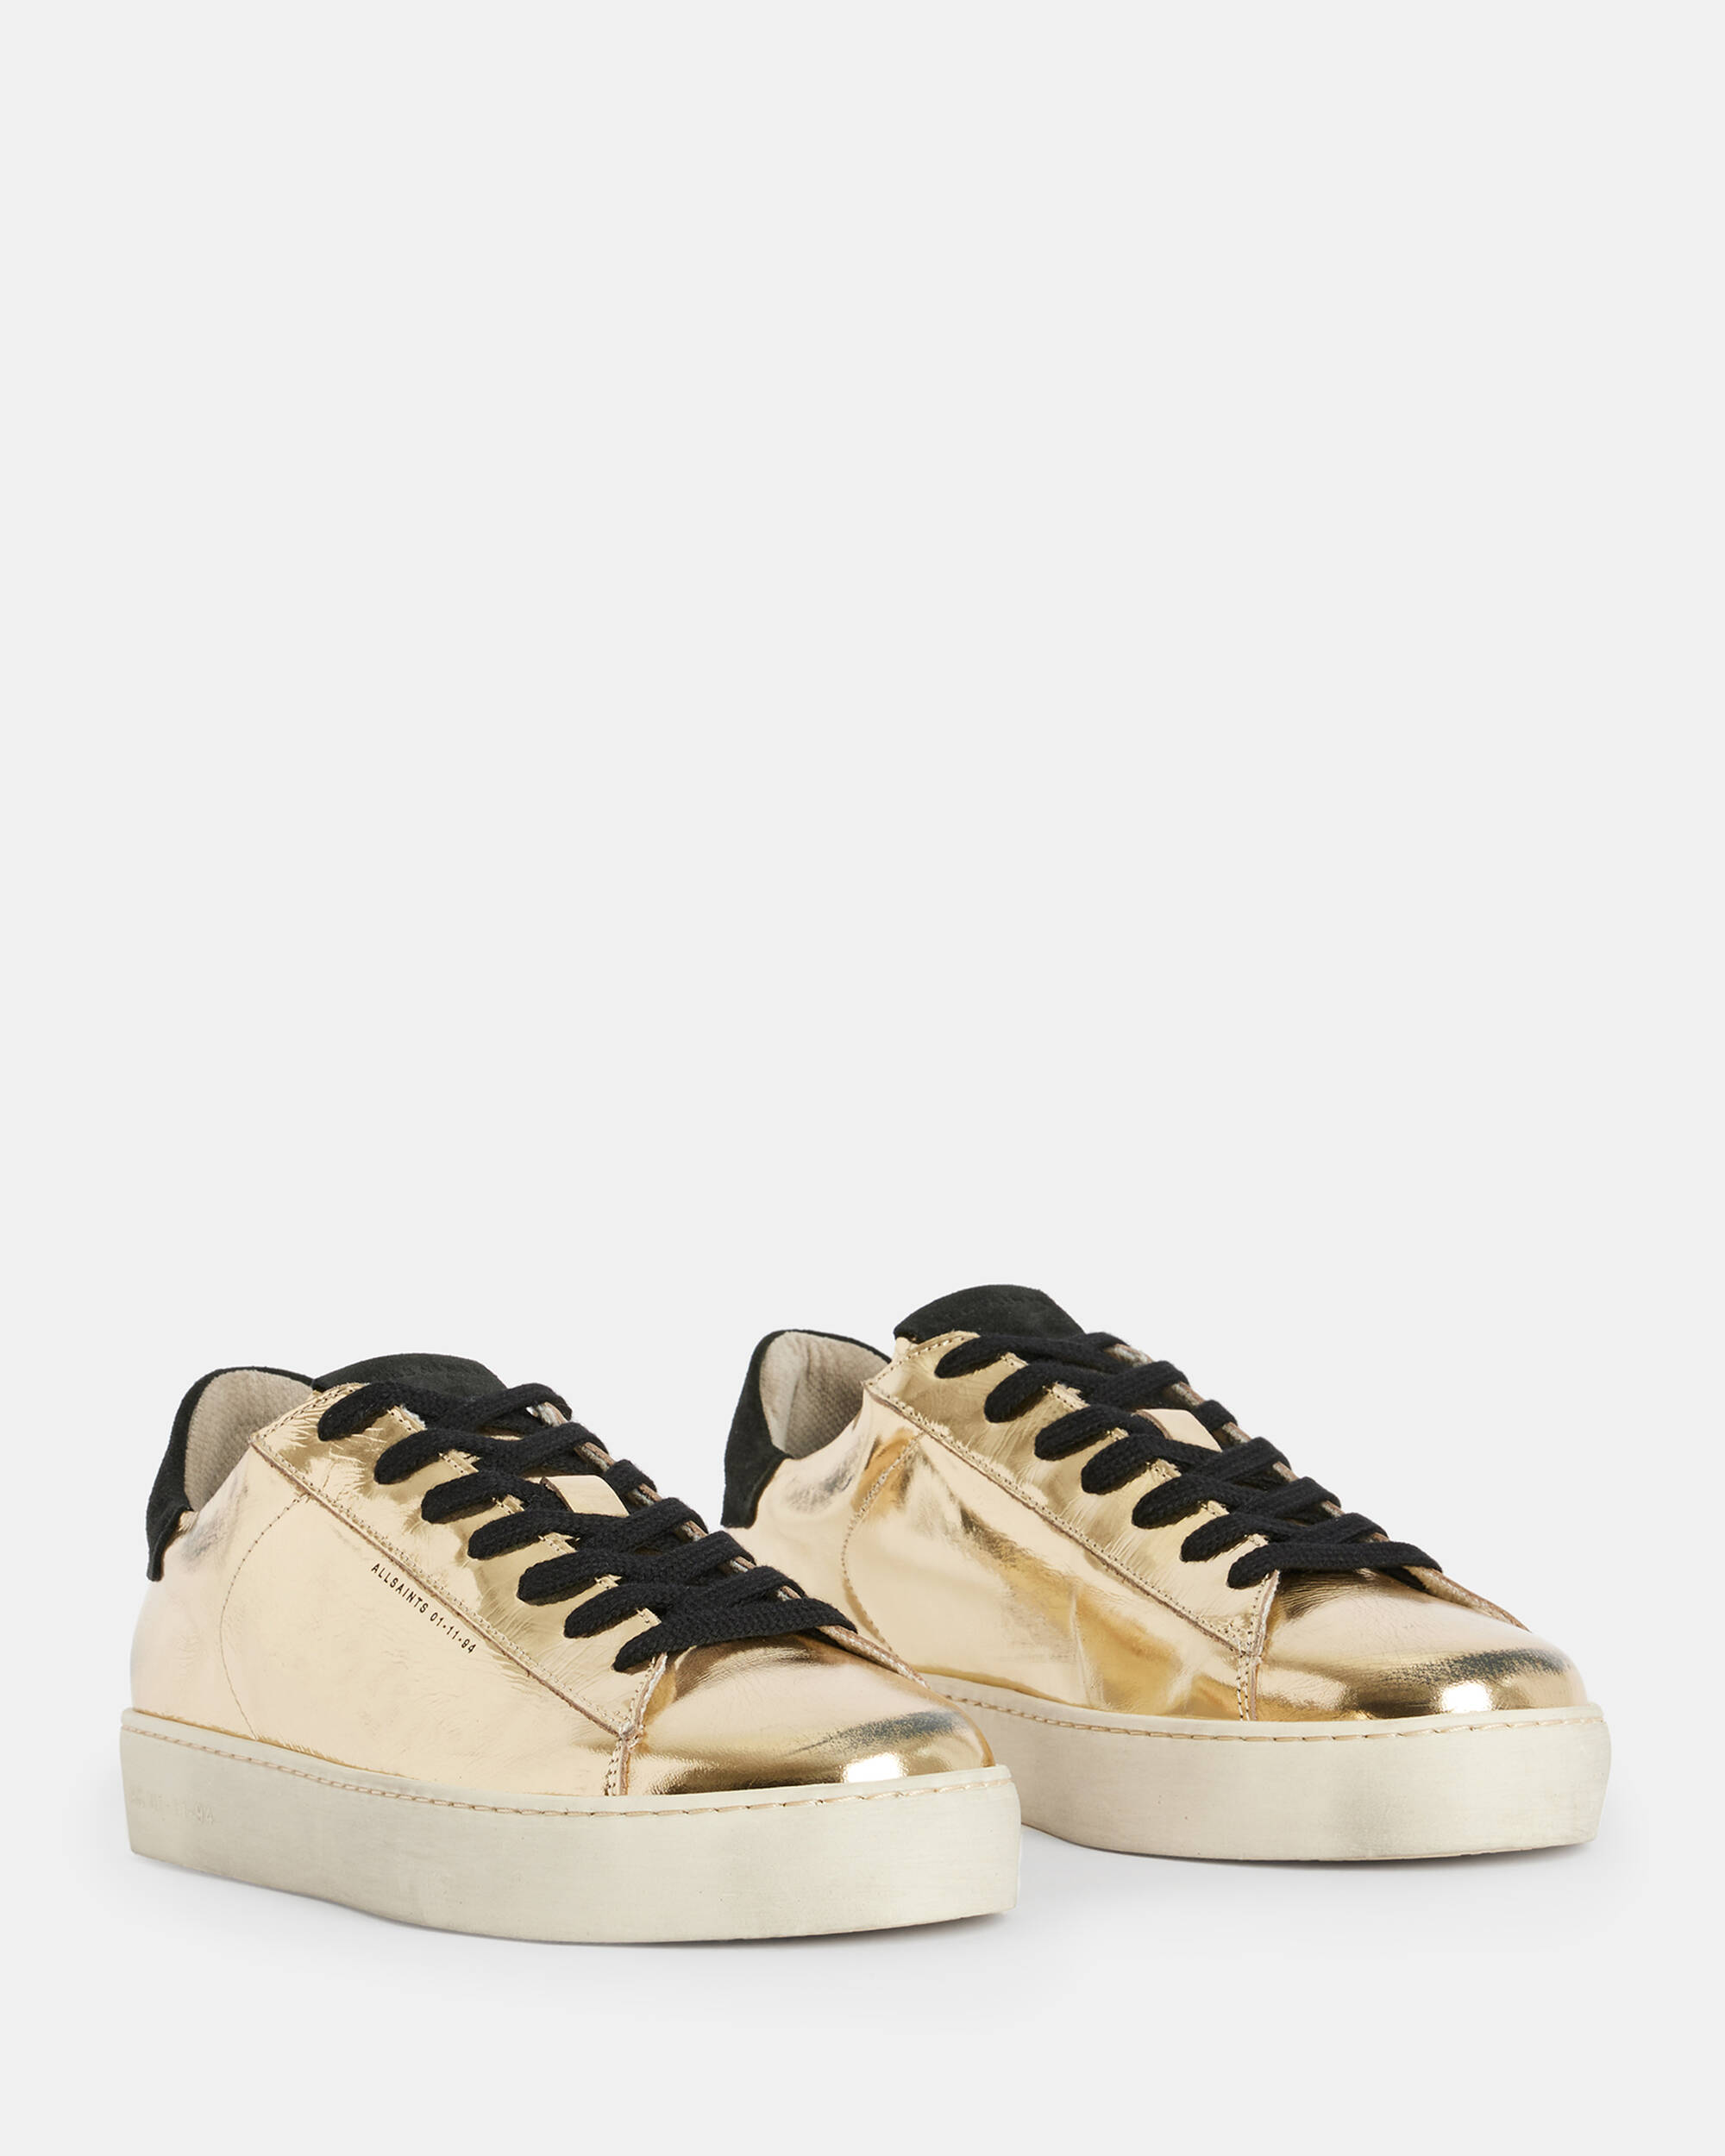 Shana Metallic Leather Sneakers  large image number 5